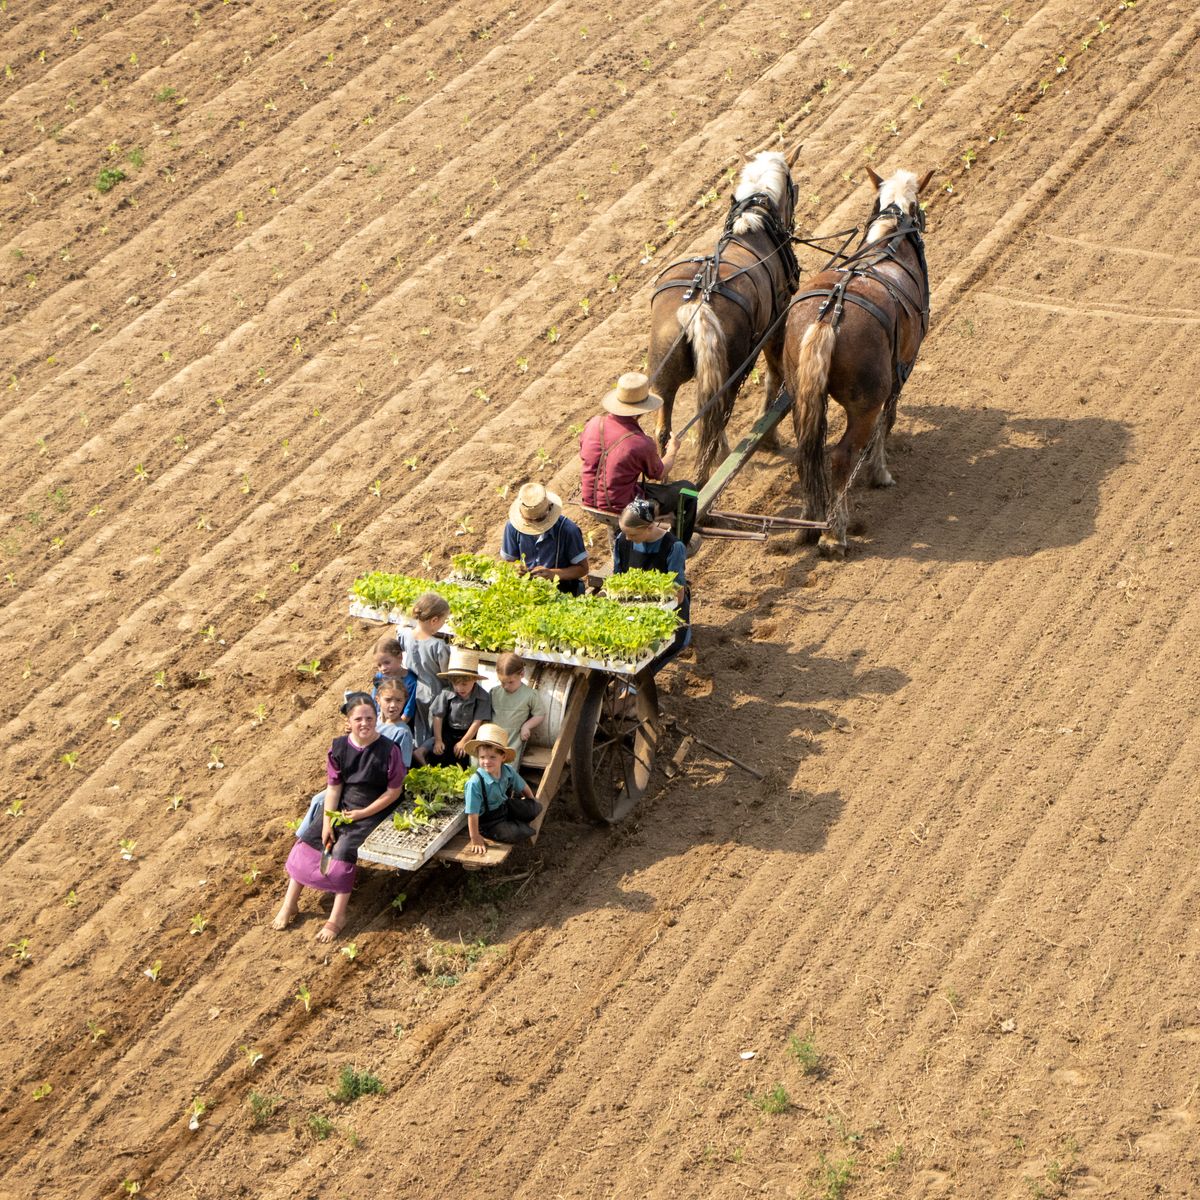  an aerial view of an Amish family engaged in farming activities. Two adults are tending to a horse-drawn plow, which moves through a field with distinct rows of soil. Several children sit on a flatbed attached to the plow, surrounded by fresh produce or plants. This scene reflects traditional farming methods without modern machinery, characteristic of Amish communities.